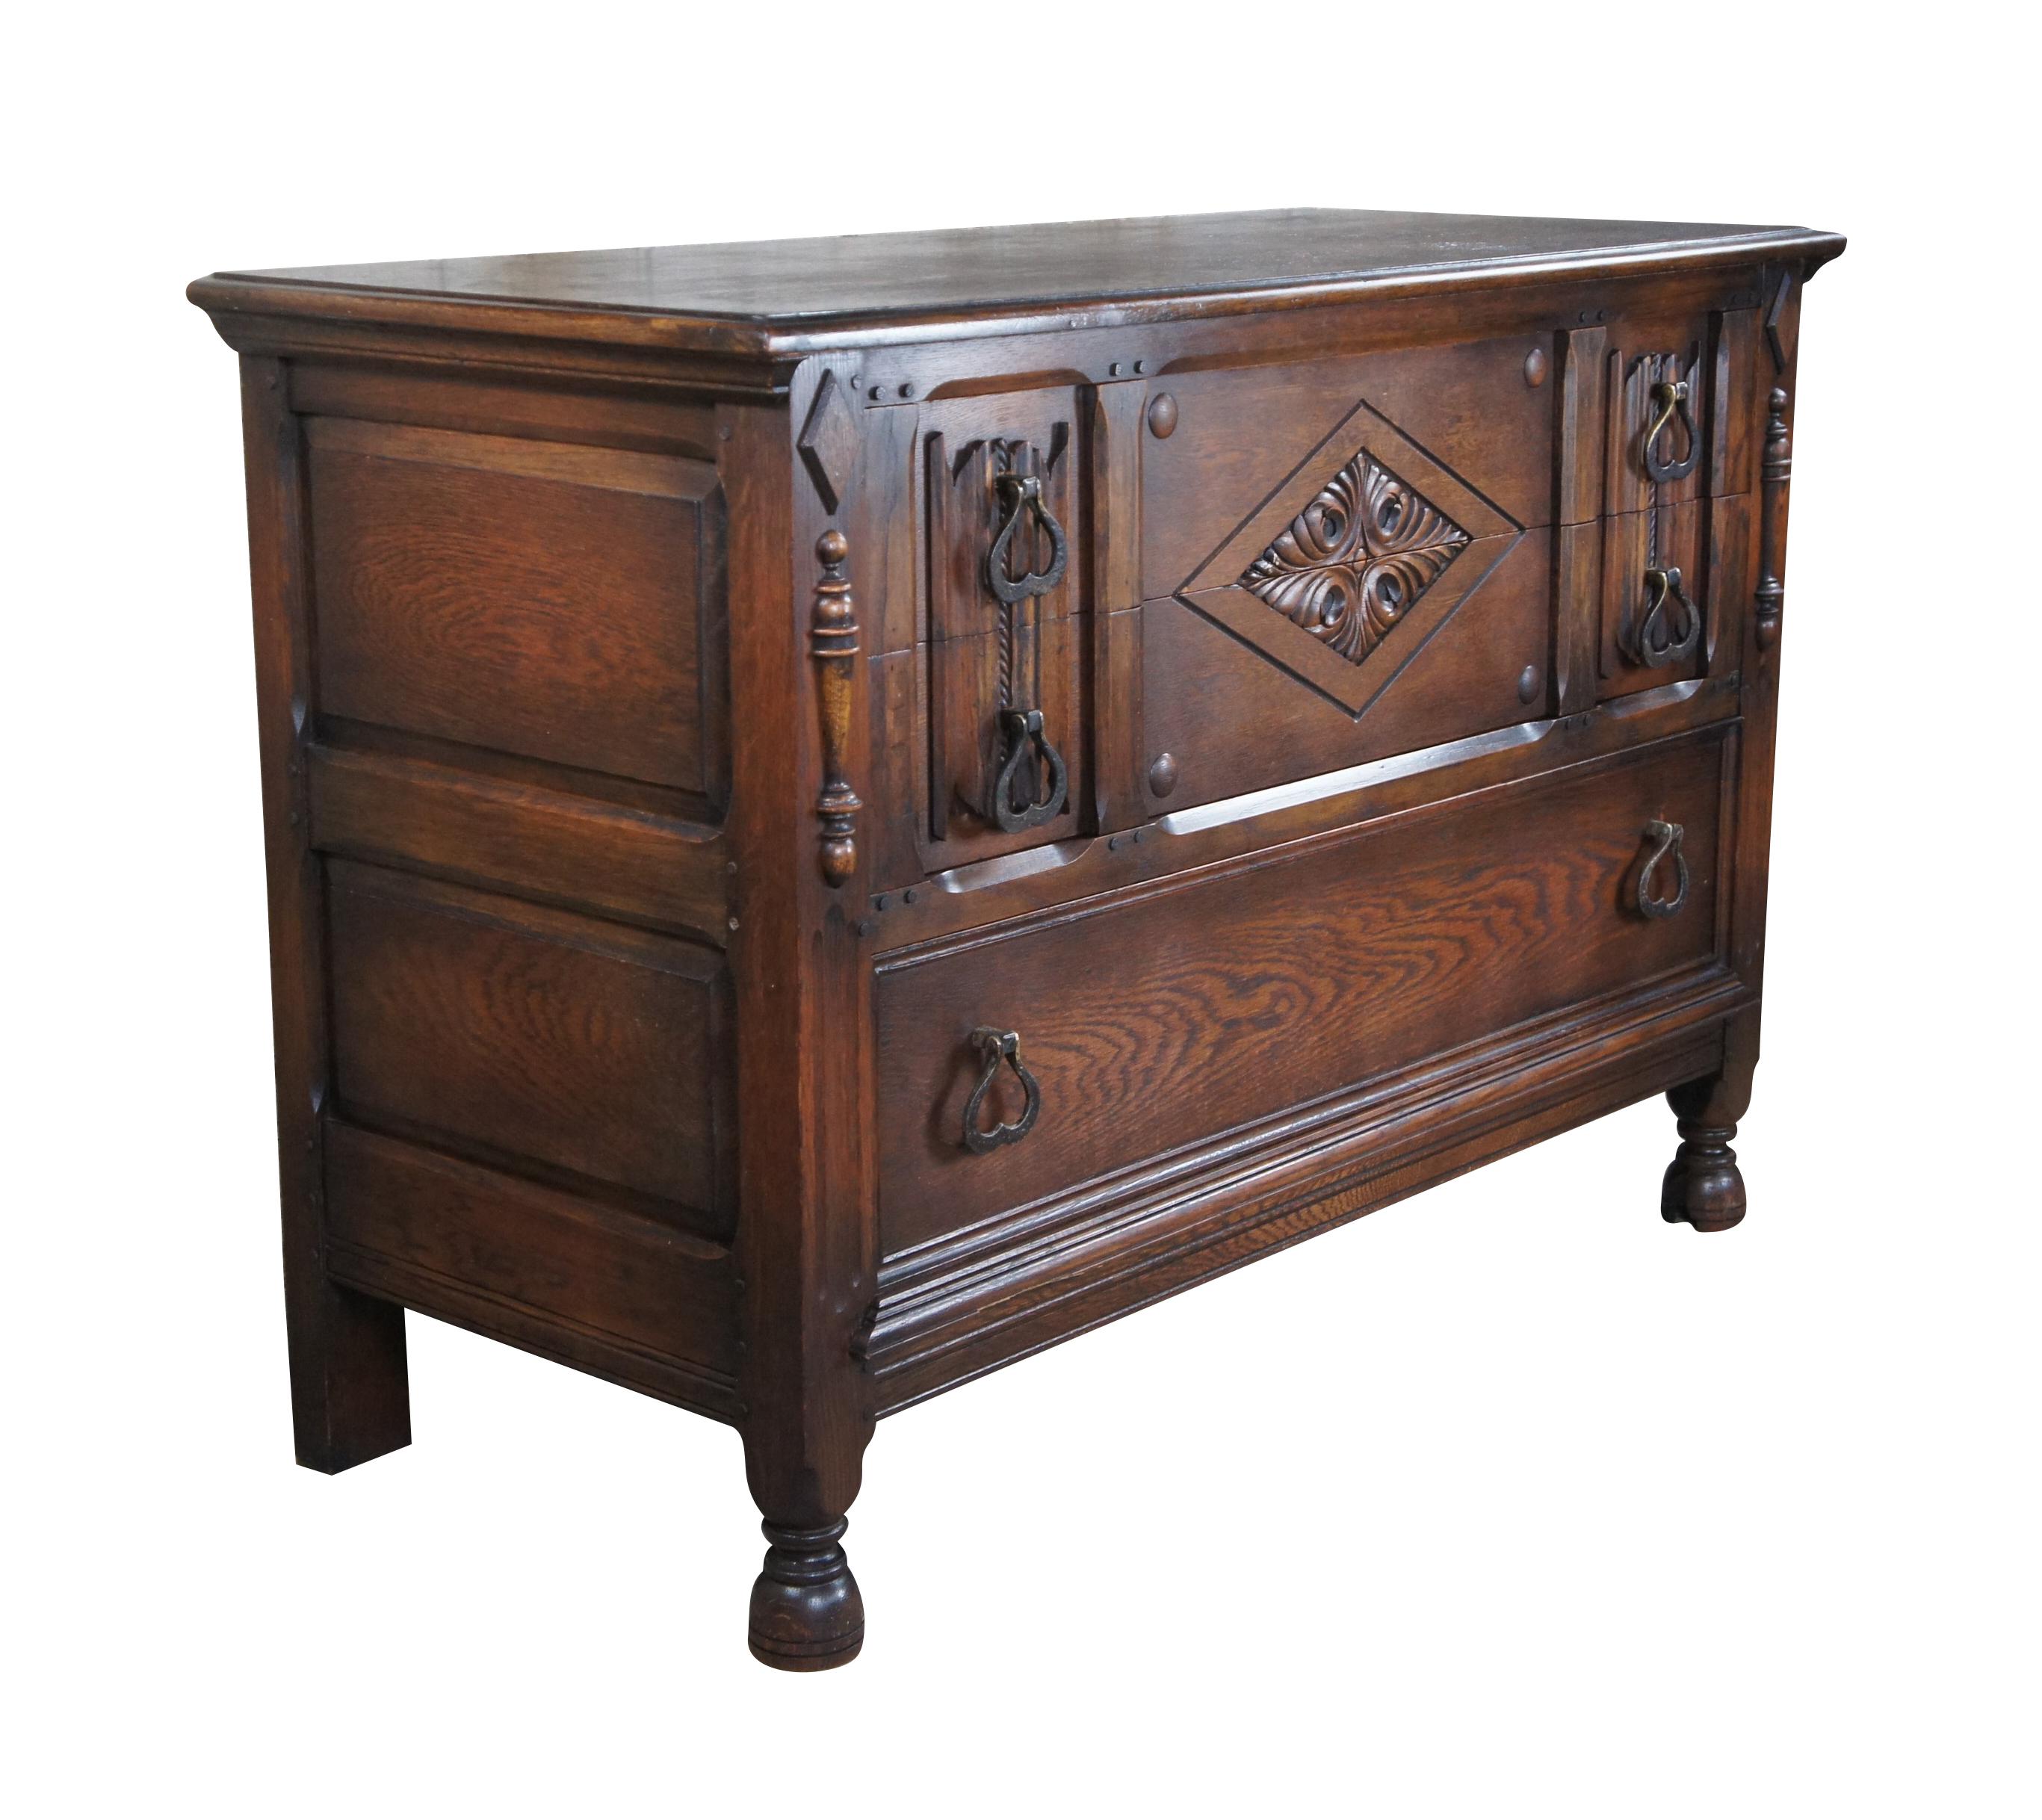 An impressive Spanish Revival chest of drawers or console by Saginaw Furniture, circa late 1930s to early 40s. Made from oak with three dovetailed drawers.  Features  a rectangular frame with intriguing linen fold and diamond pattern canthus carved